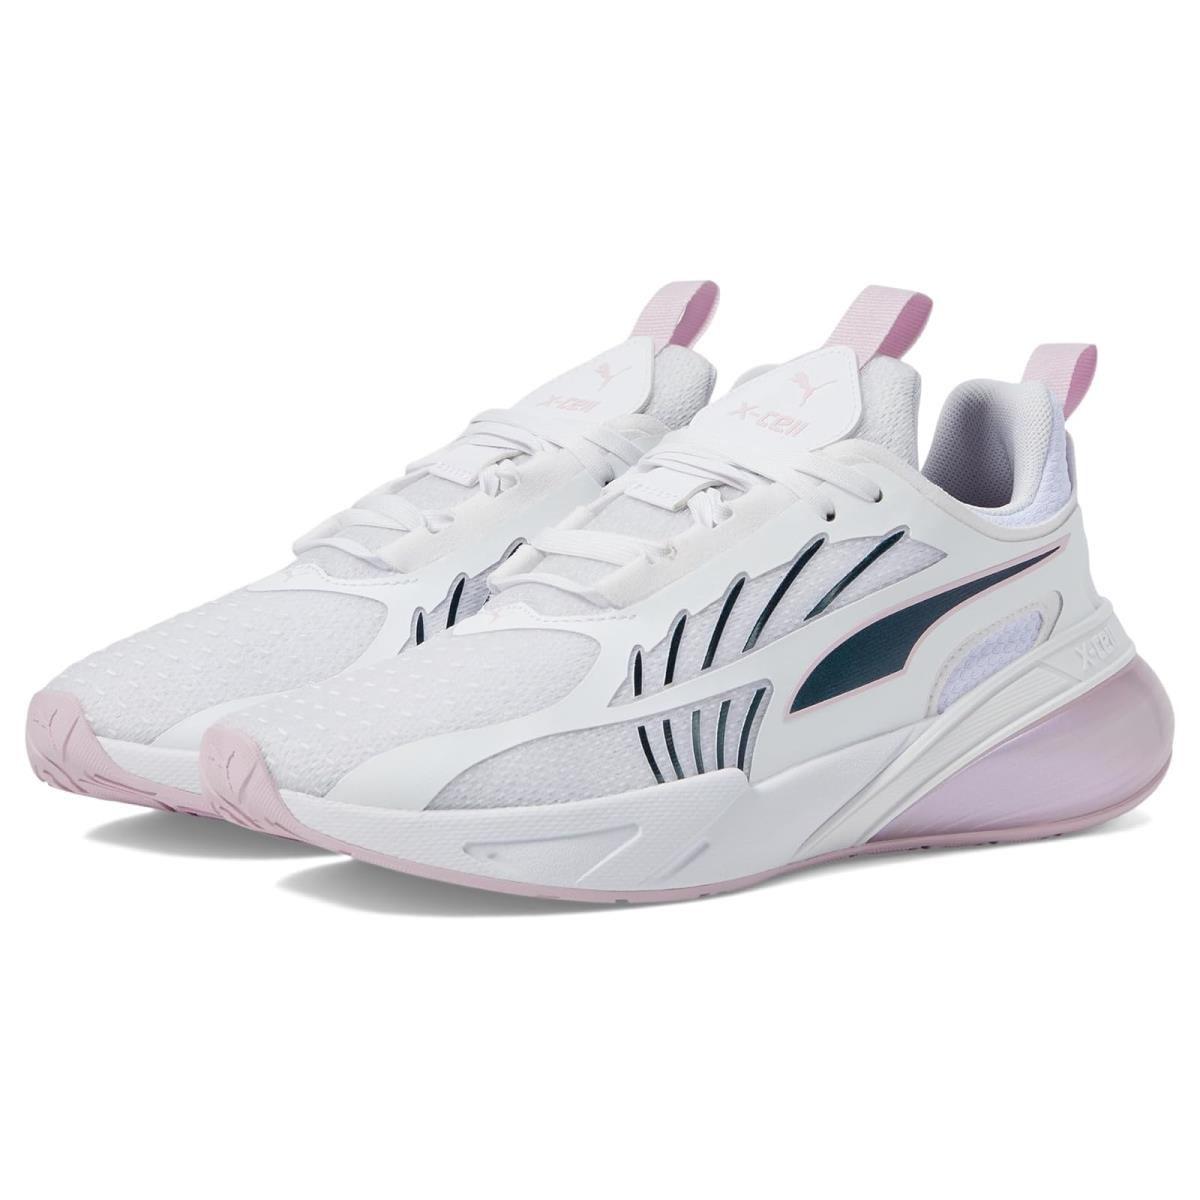 Woman`s Sneakers Athletic Shoes Puma X-cell Action Metachromatic PUMA White/Grape Mist